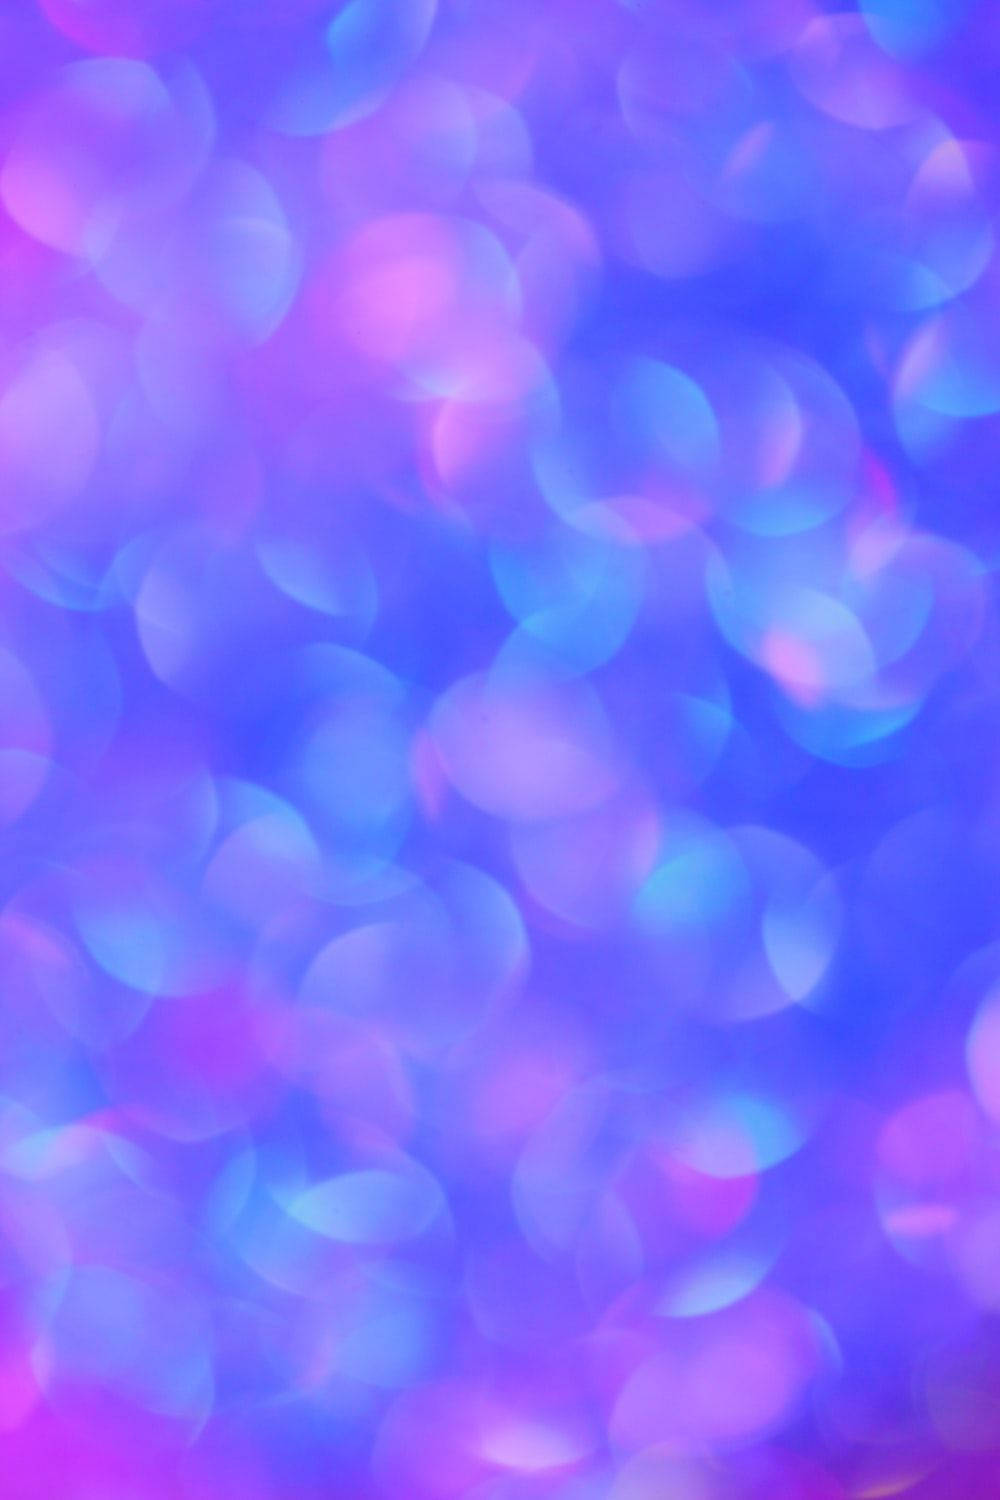 Blurred Light Sources In Light Purple iPhone Wallpaper